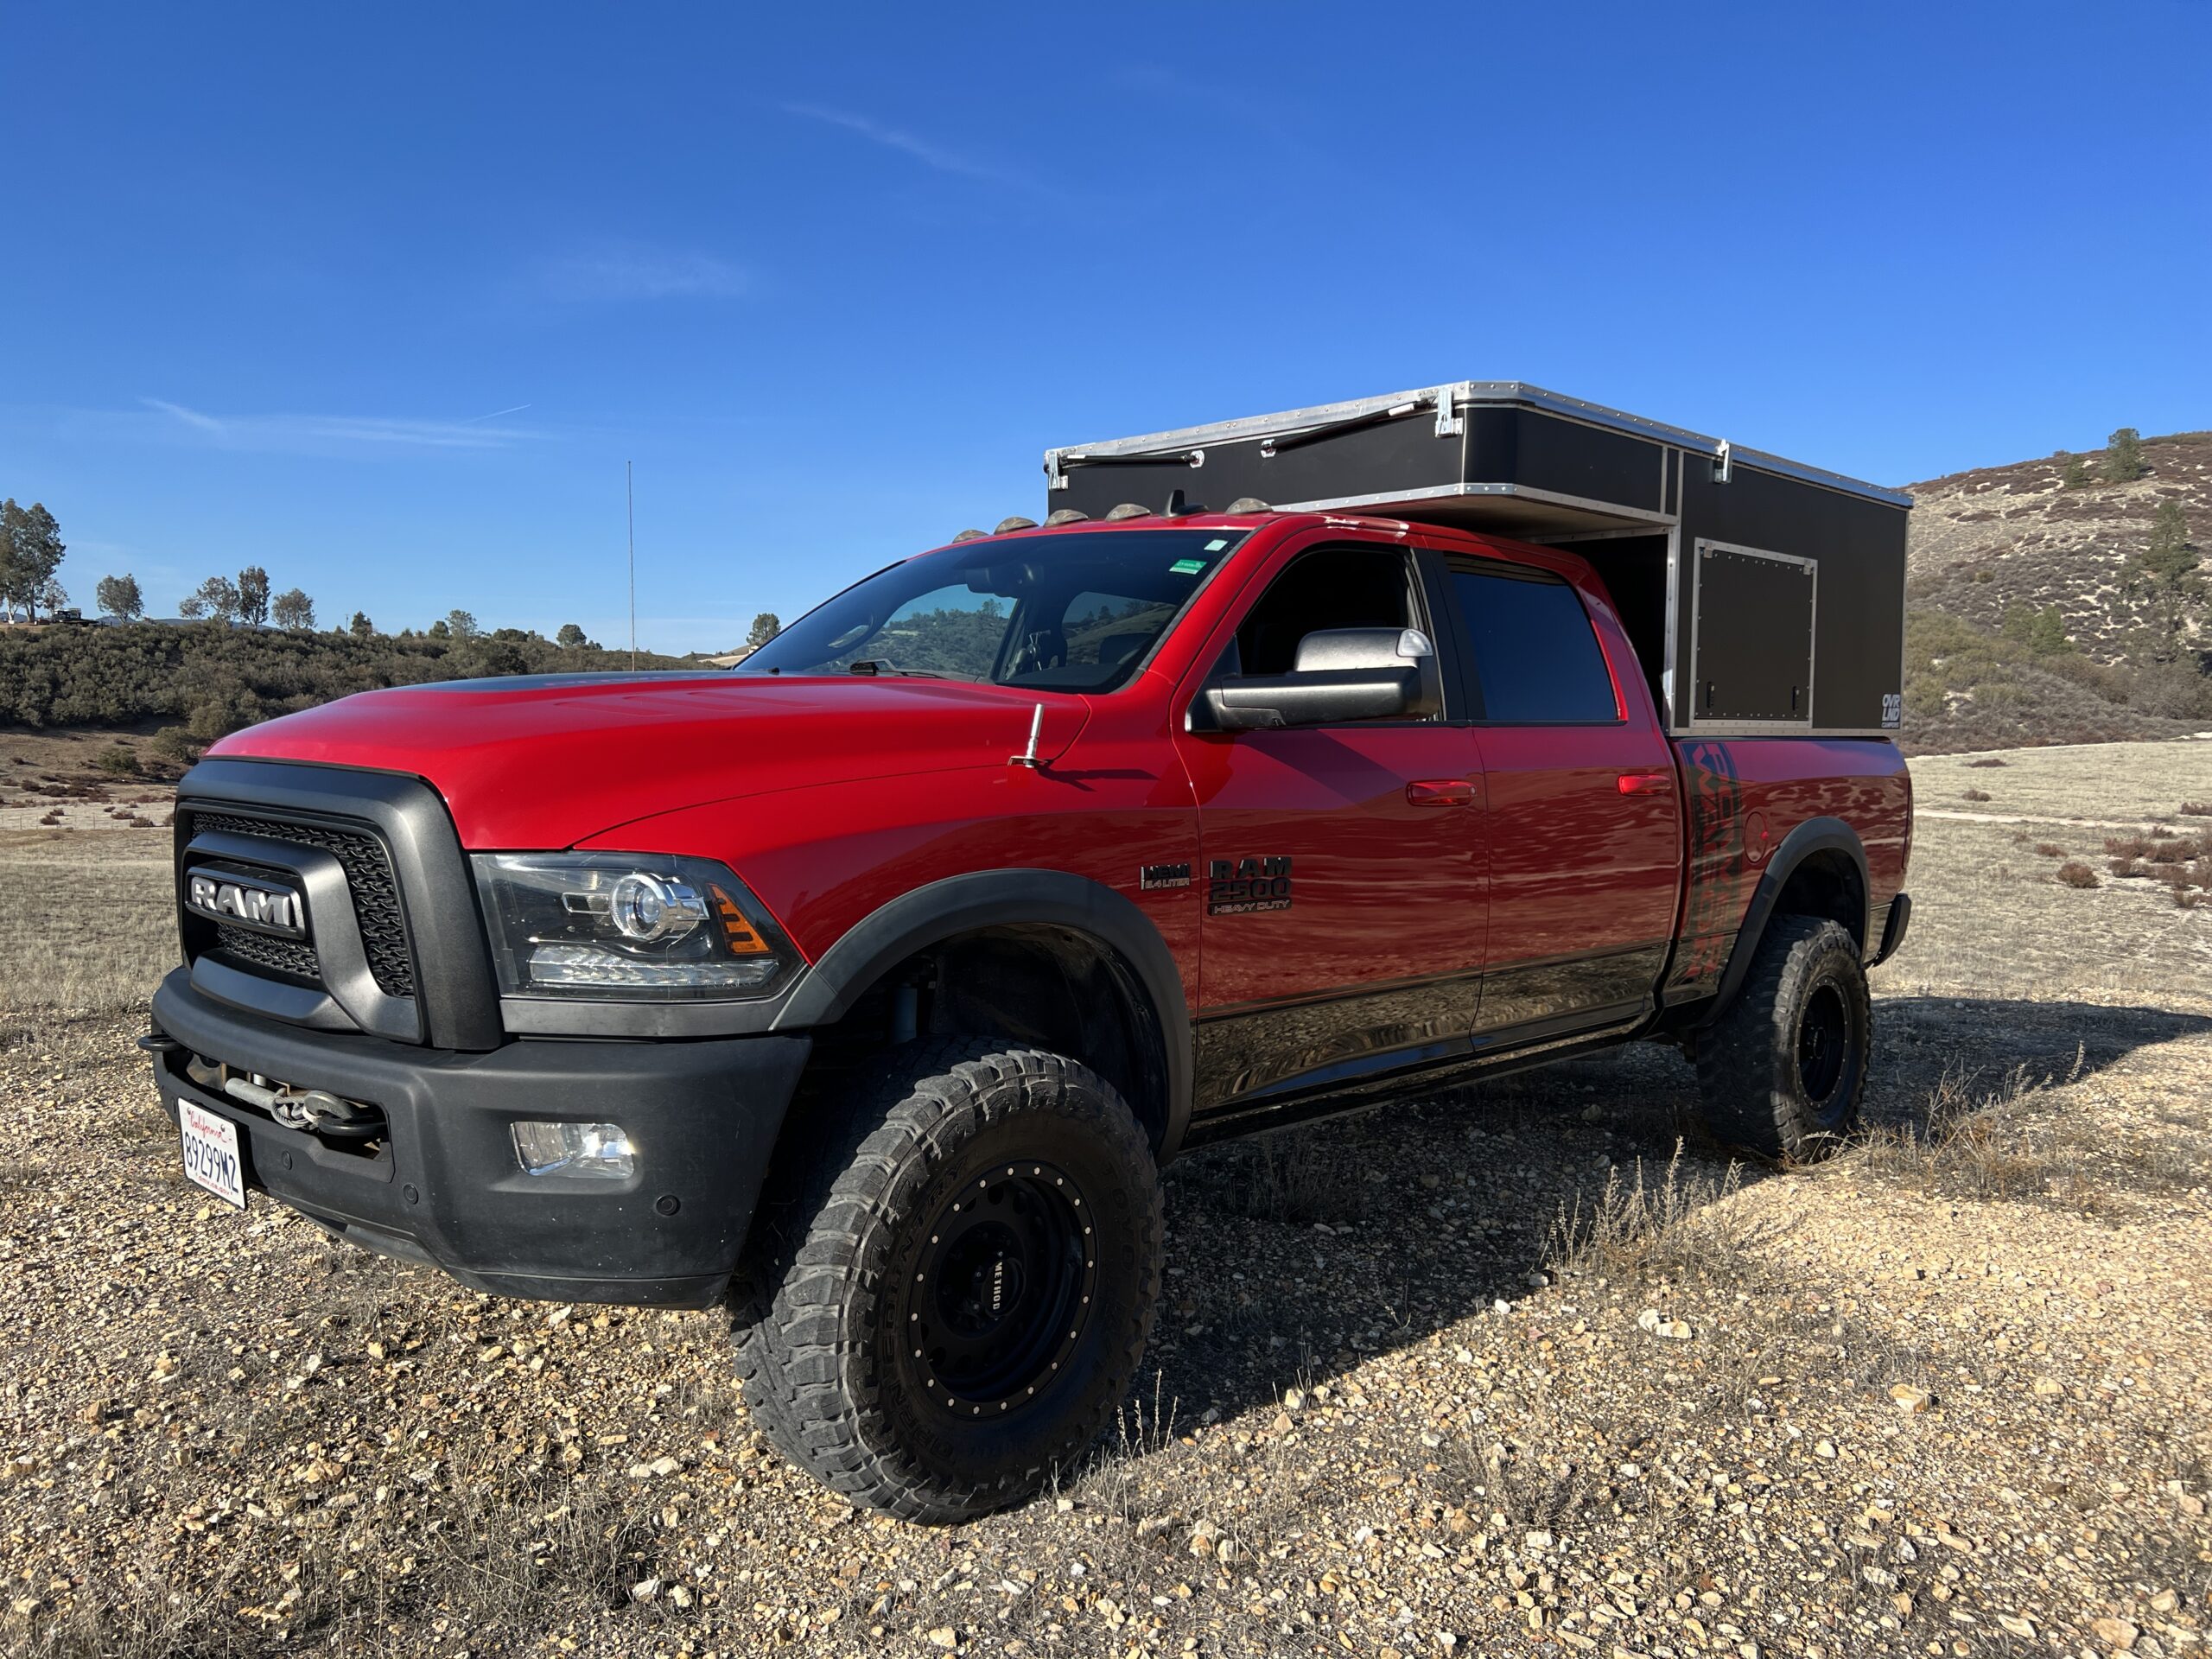 Red Power Wagon truck with OVRLND Campers popup camper shell fitted.